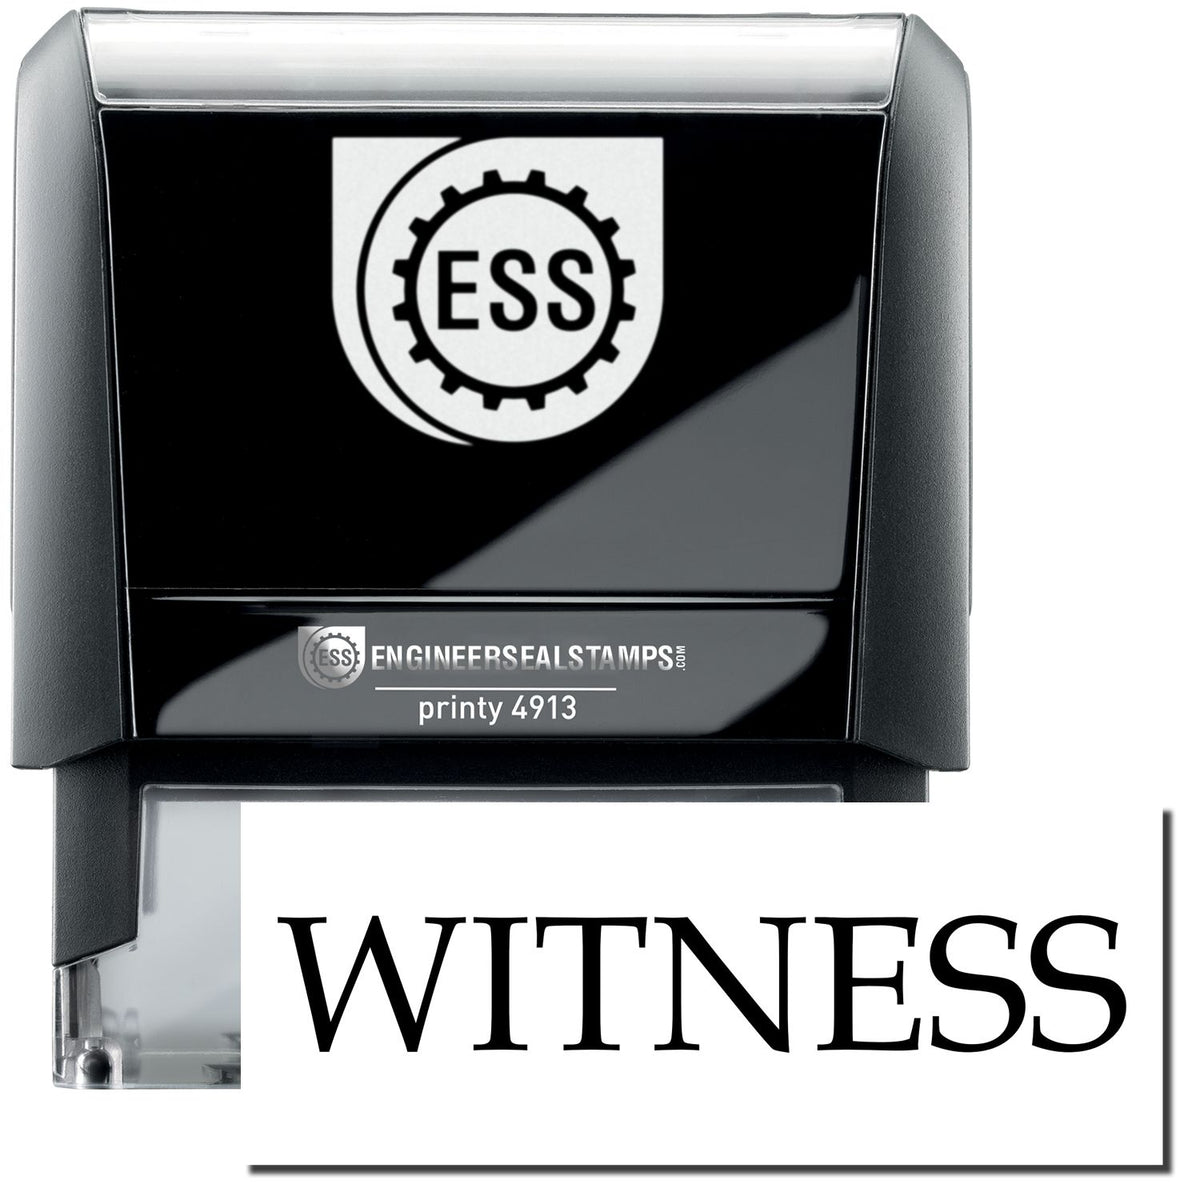 A self-inking stamp with a stamped image showing how the text &quot;WITNESS&quot; in a large bold font is displayed by it.